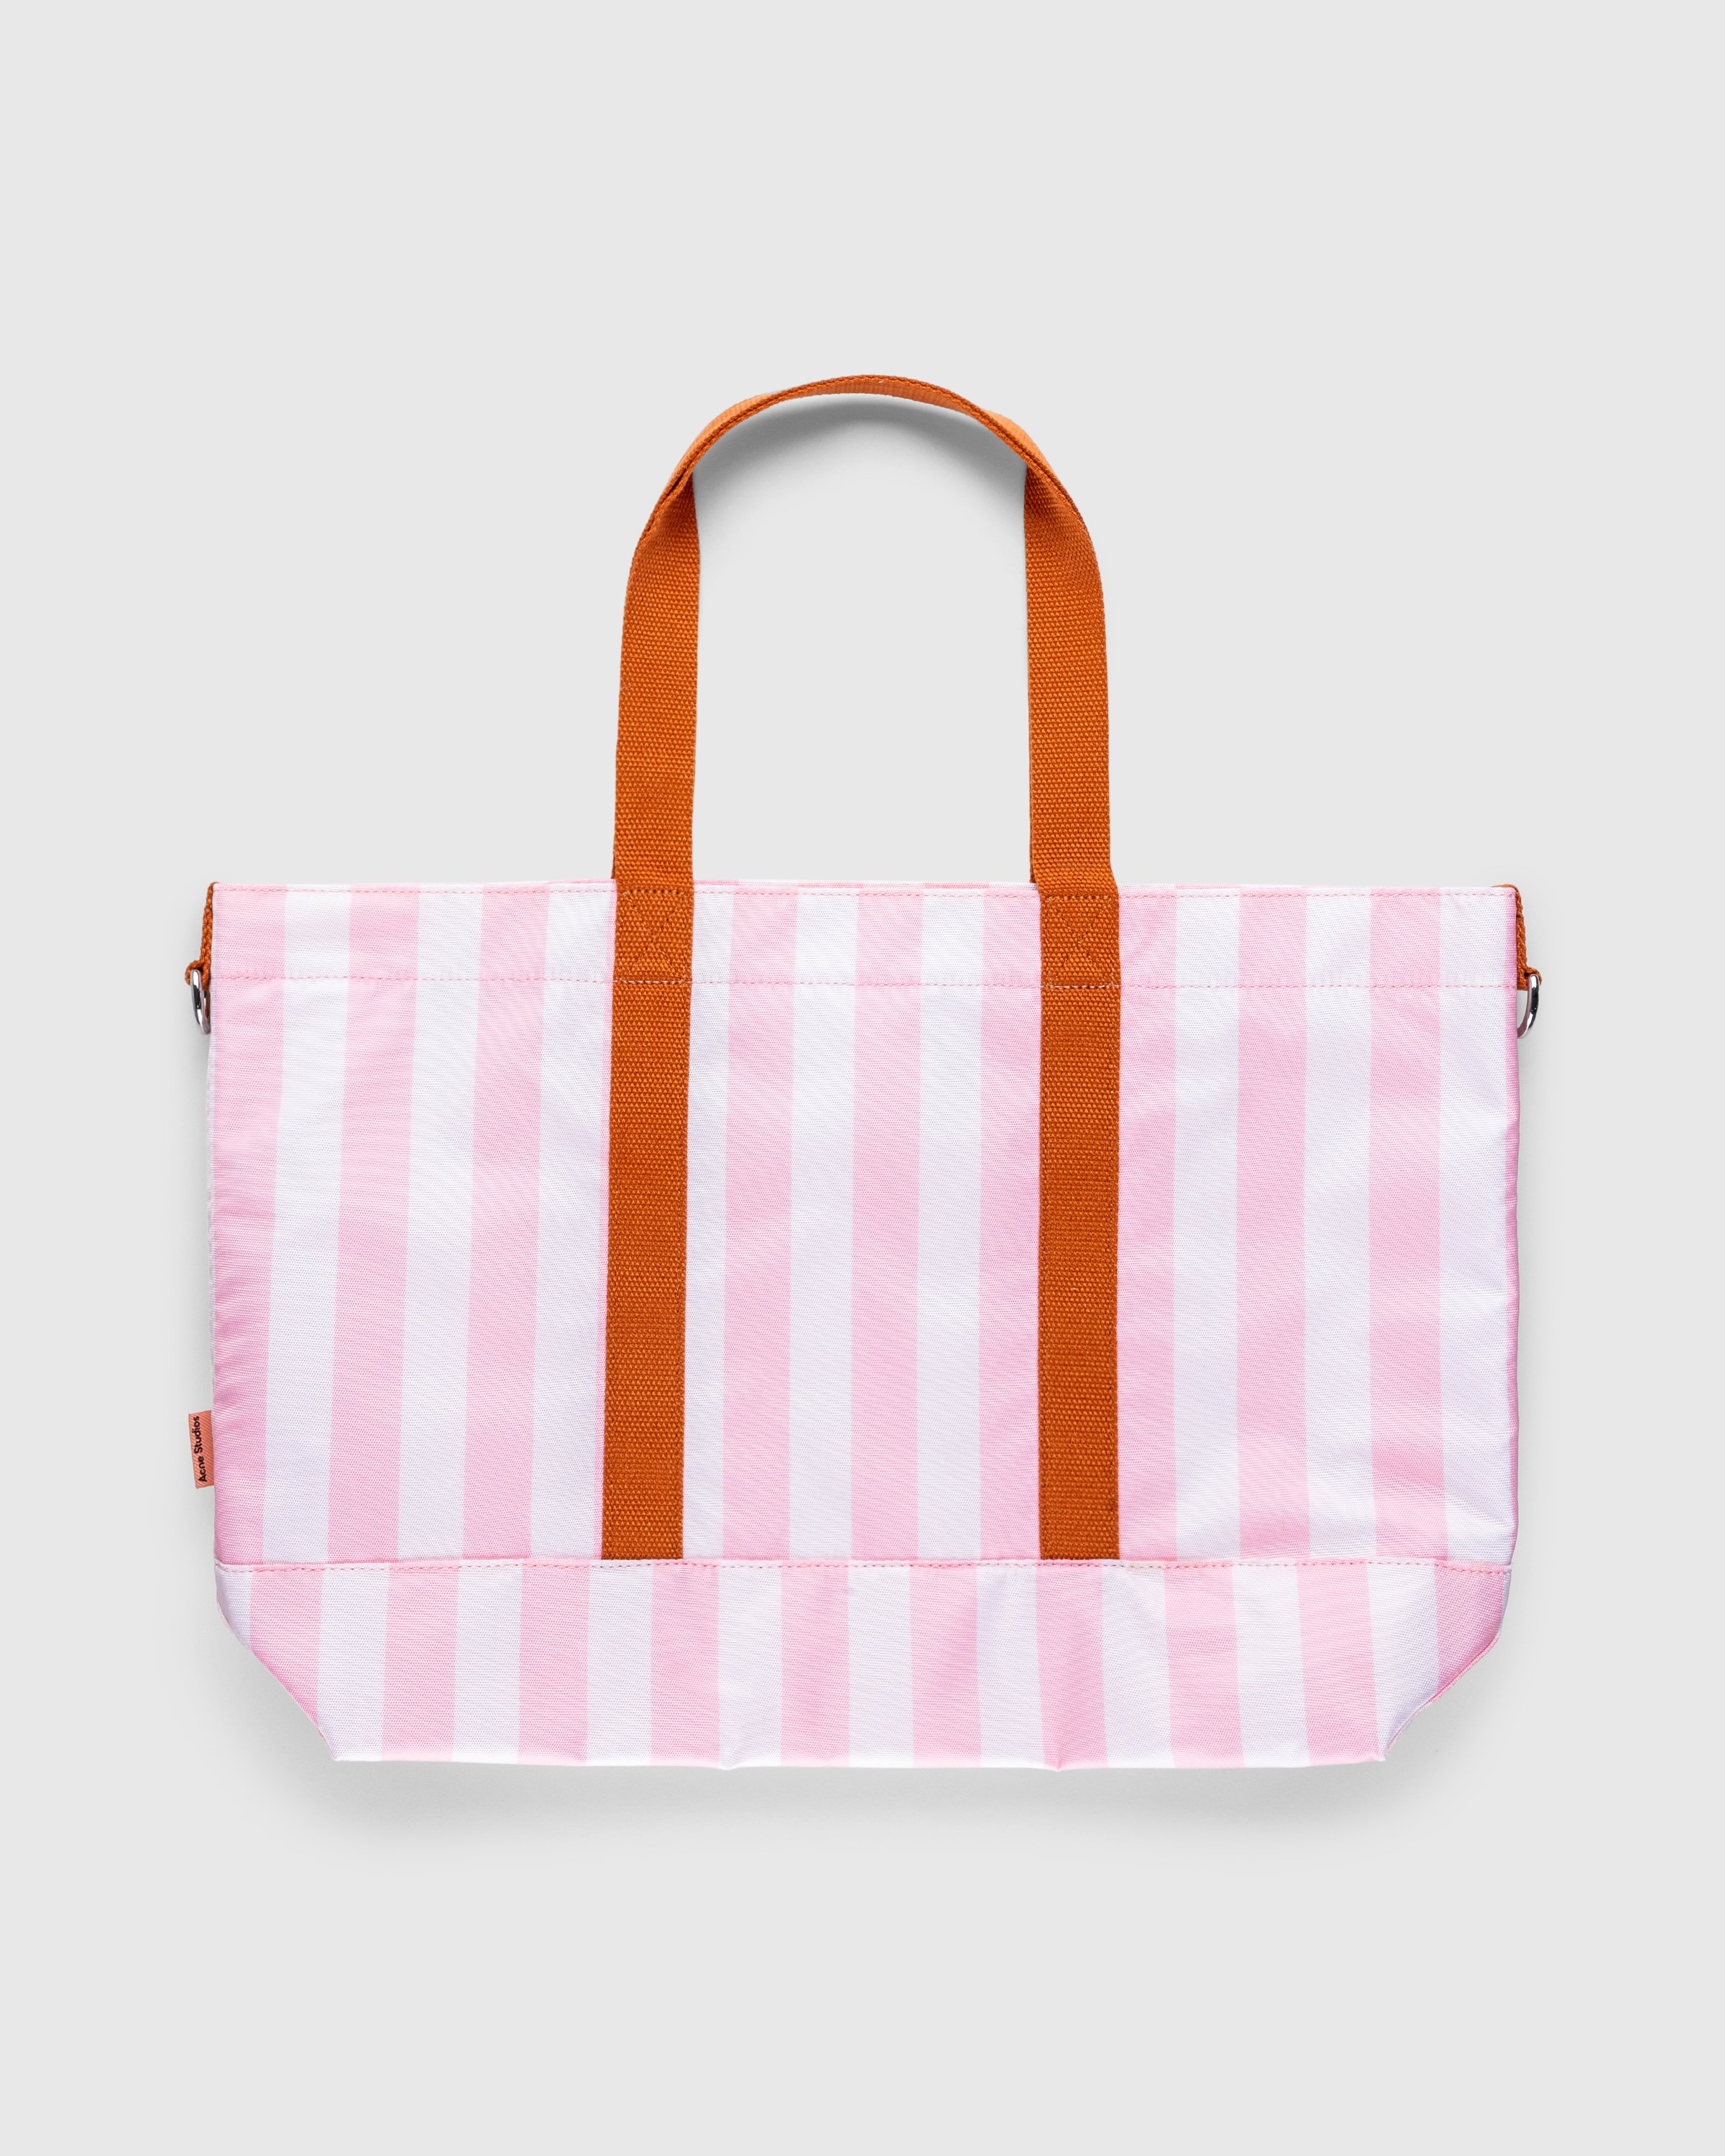 Acne Studios - FN-UX-BAGS000153 Light Pink/ Off White - Accessories - Pink - Image 2